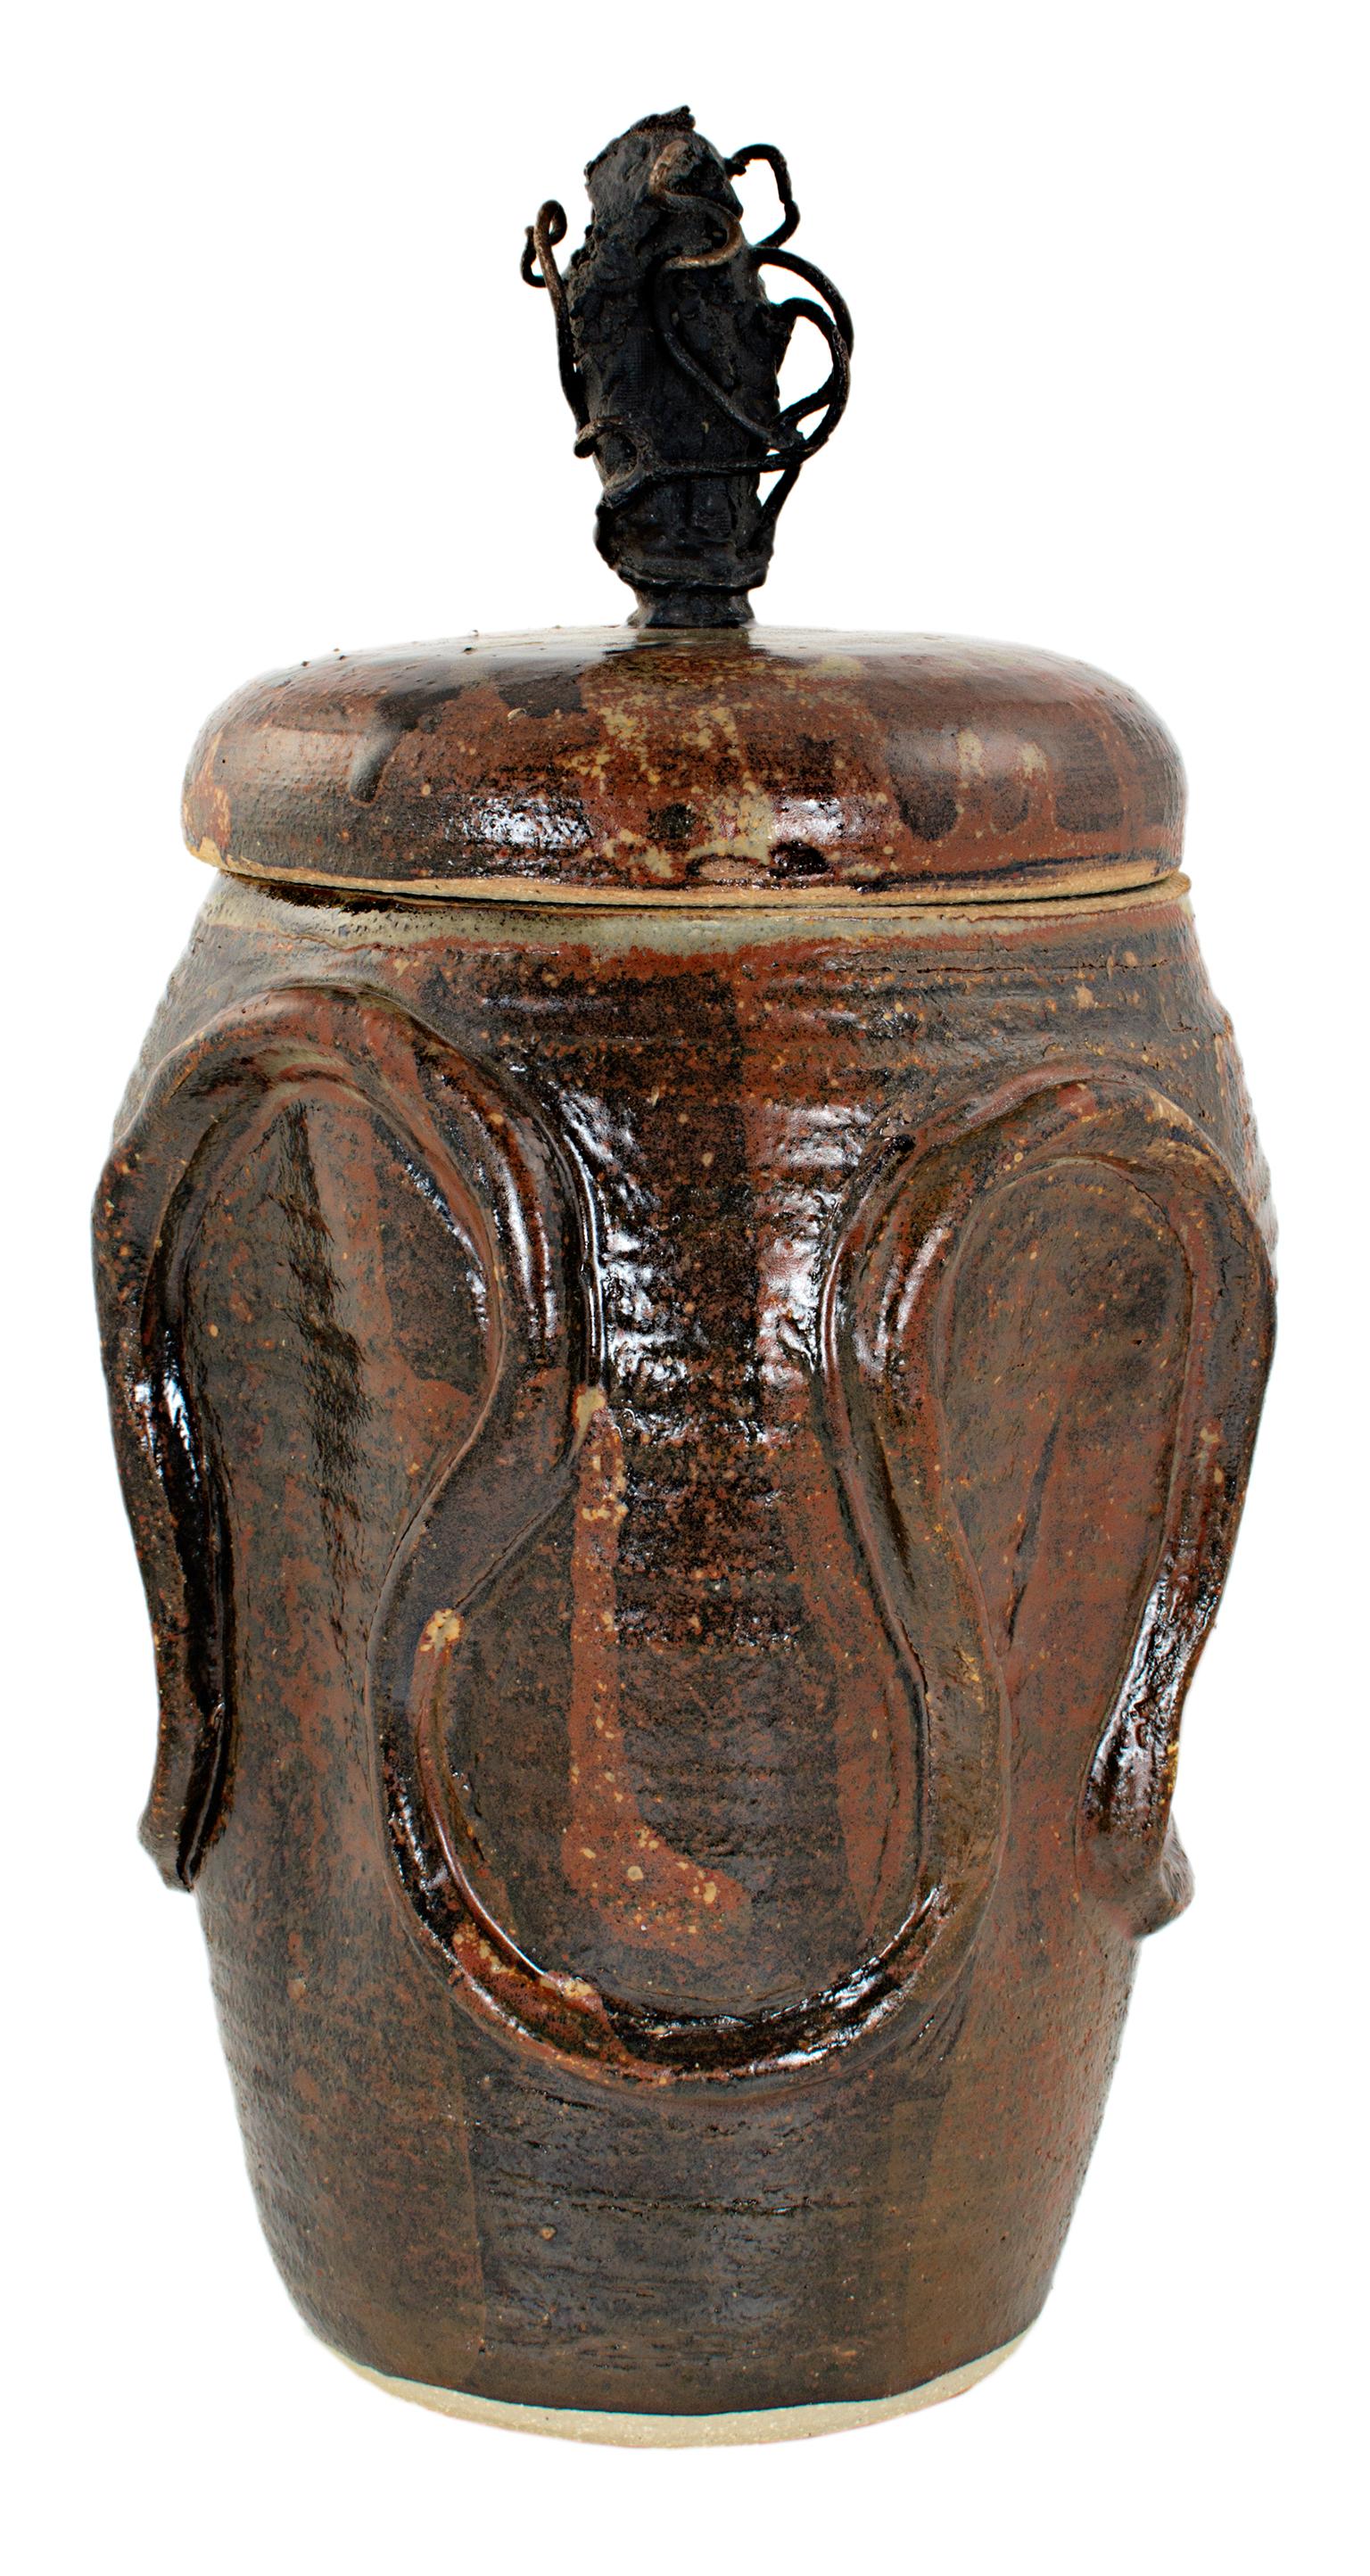 "Cover Jar w/ Grapevines" is a stoneware and bronze vessel by Ernst Gramatzki. 

10 1/2" x 5 3/4" 

Ernst Gramatzki is a world renowned artist, sculptor, potter, painter and poet. Some of his work is in the Smithsonian Institute in D.C. as well as